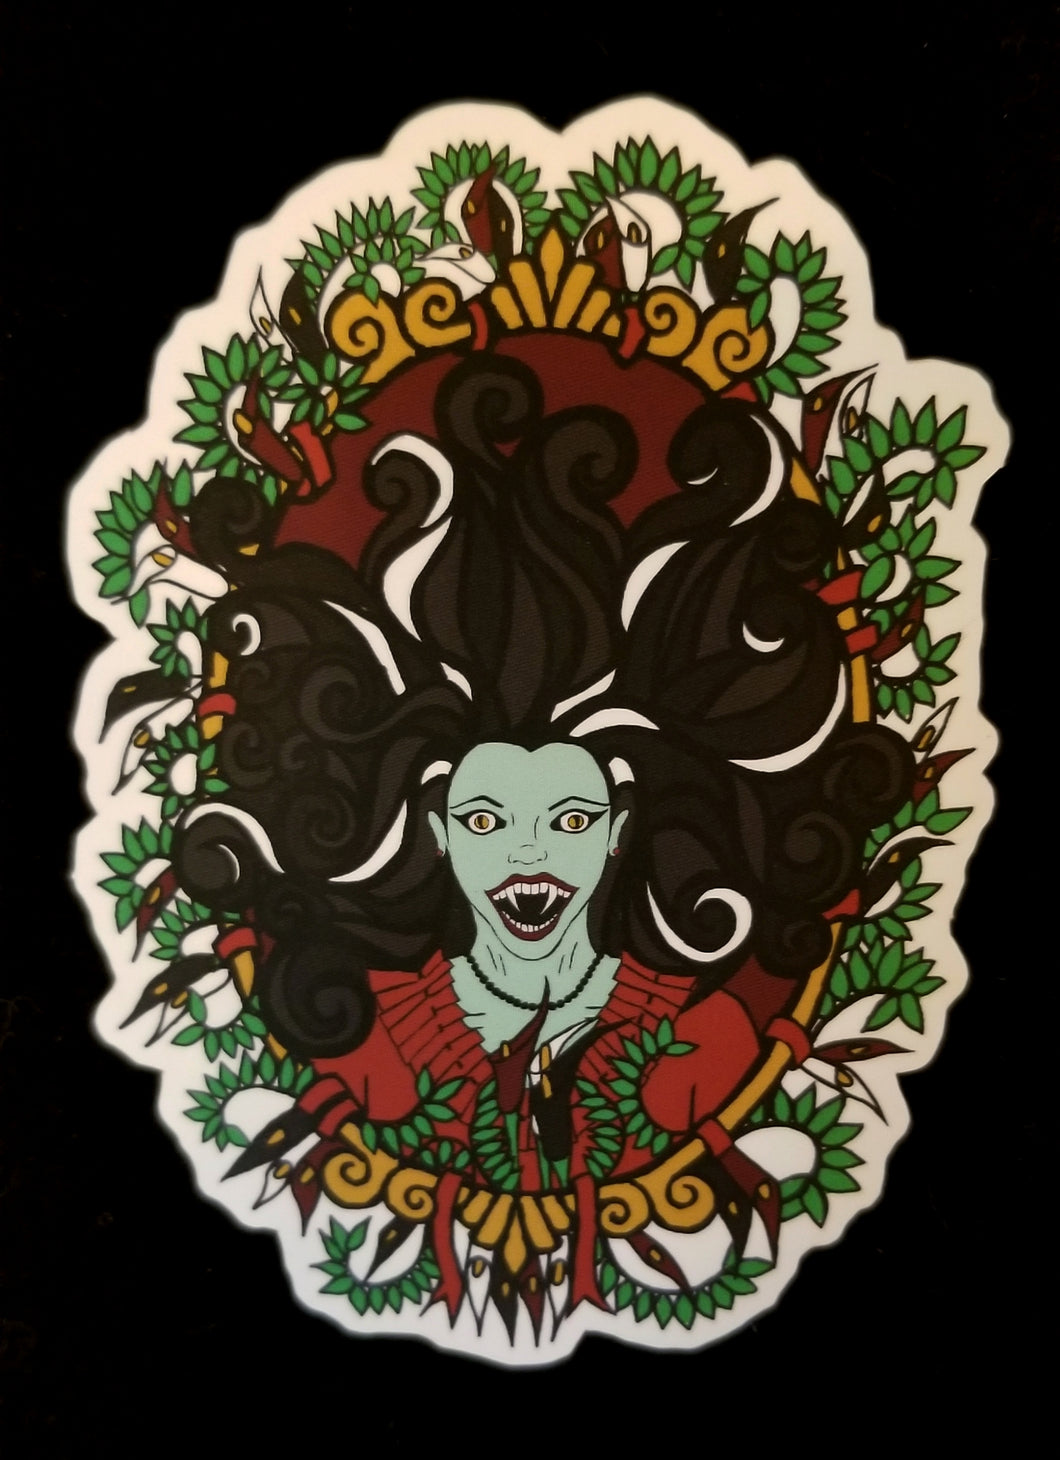 Vampire woman with flying hair